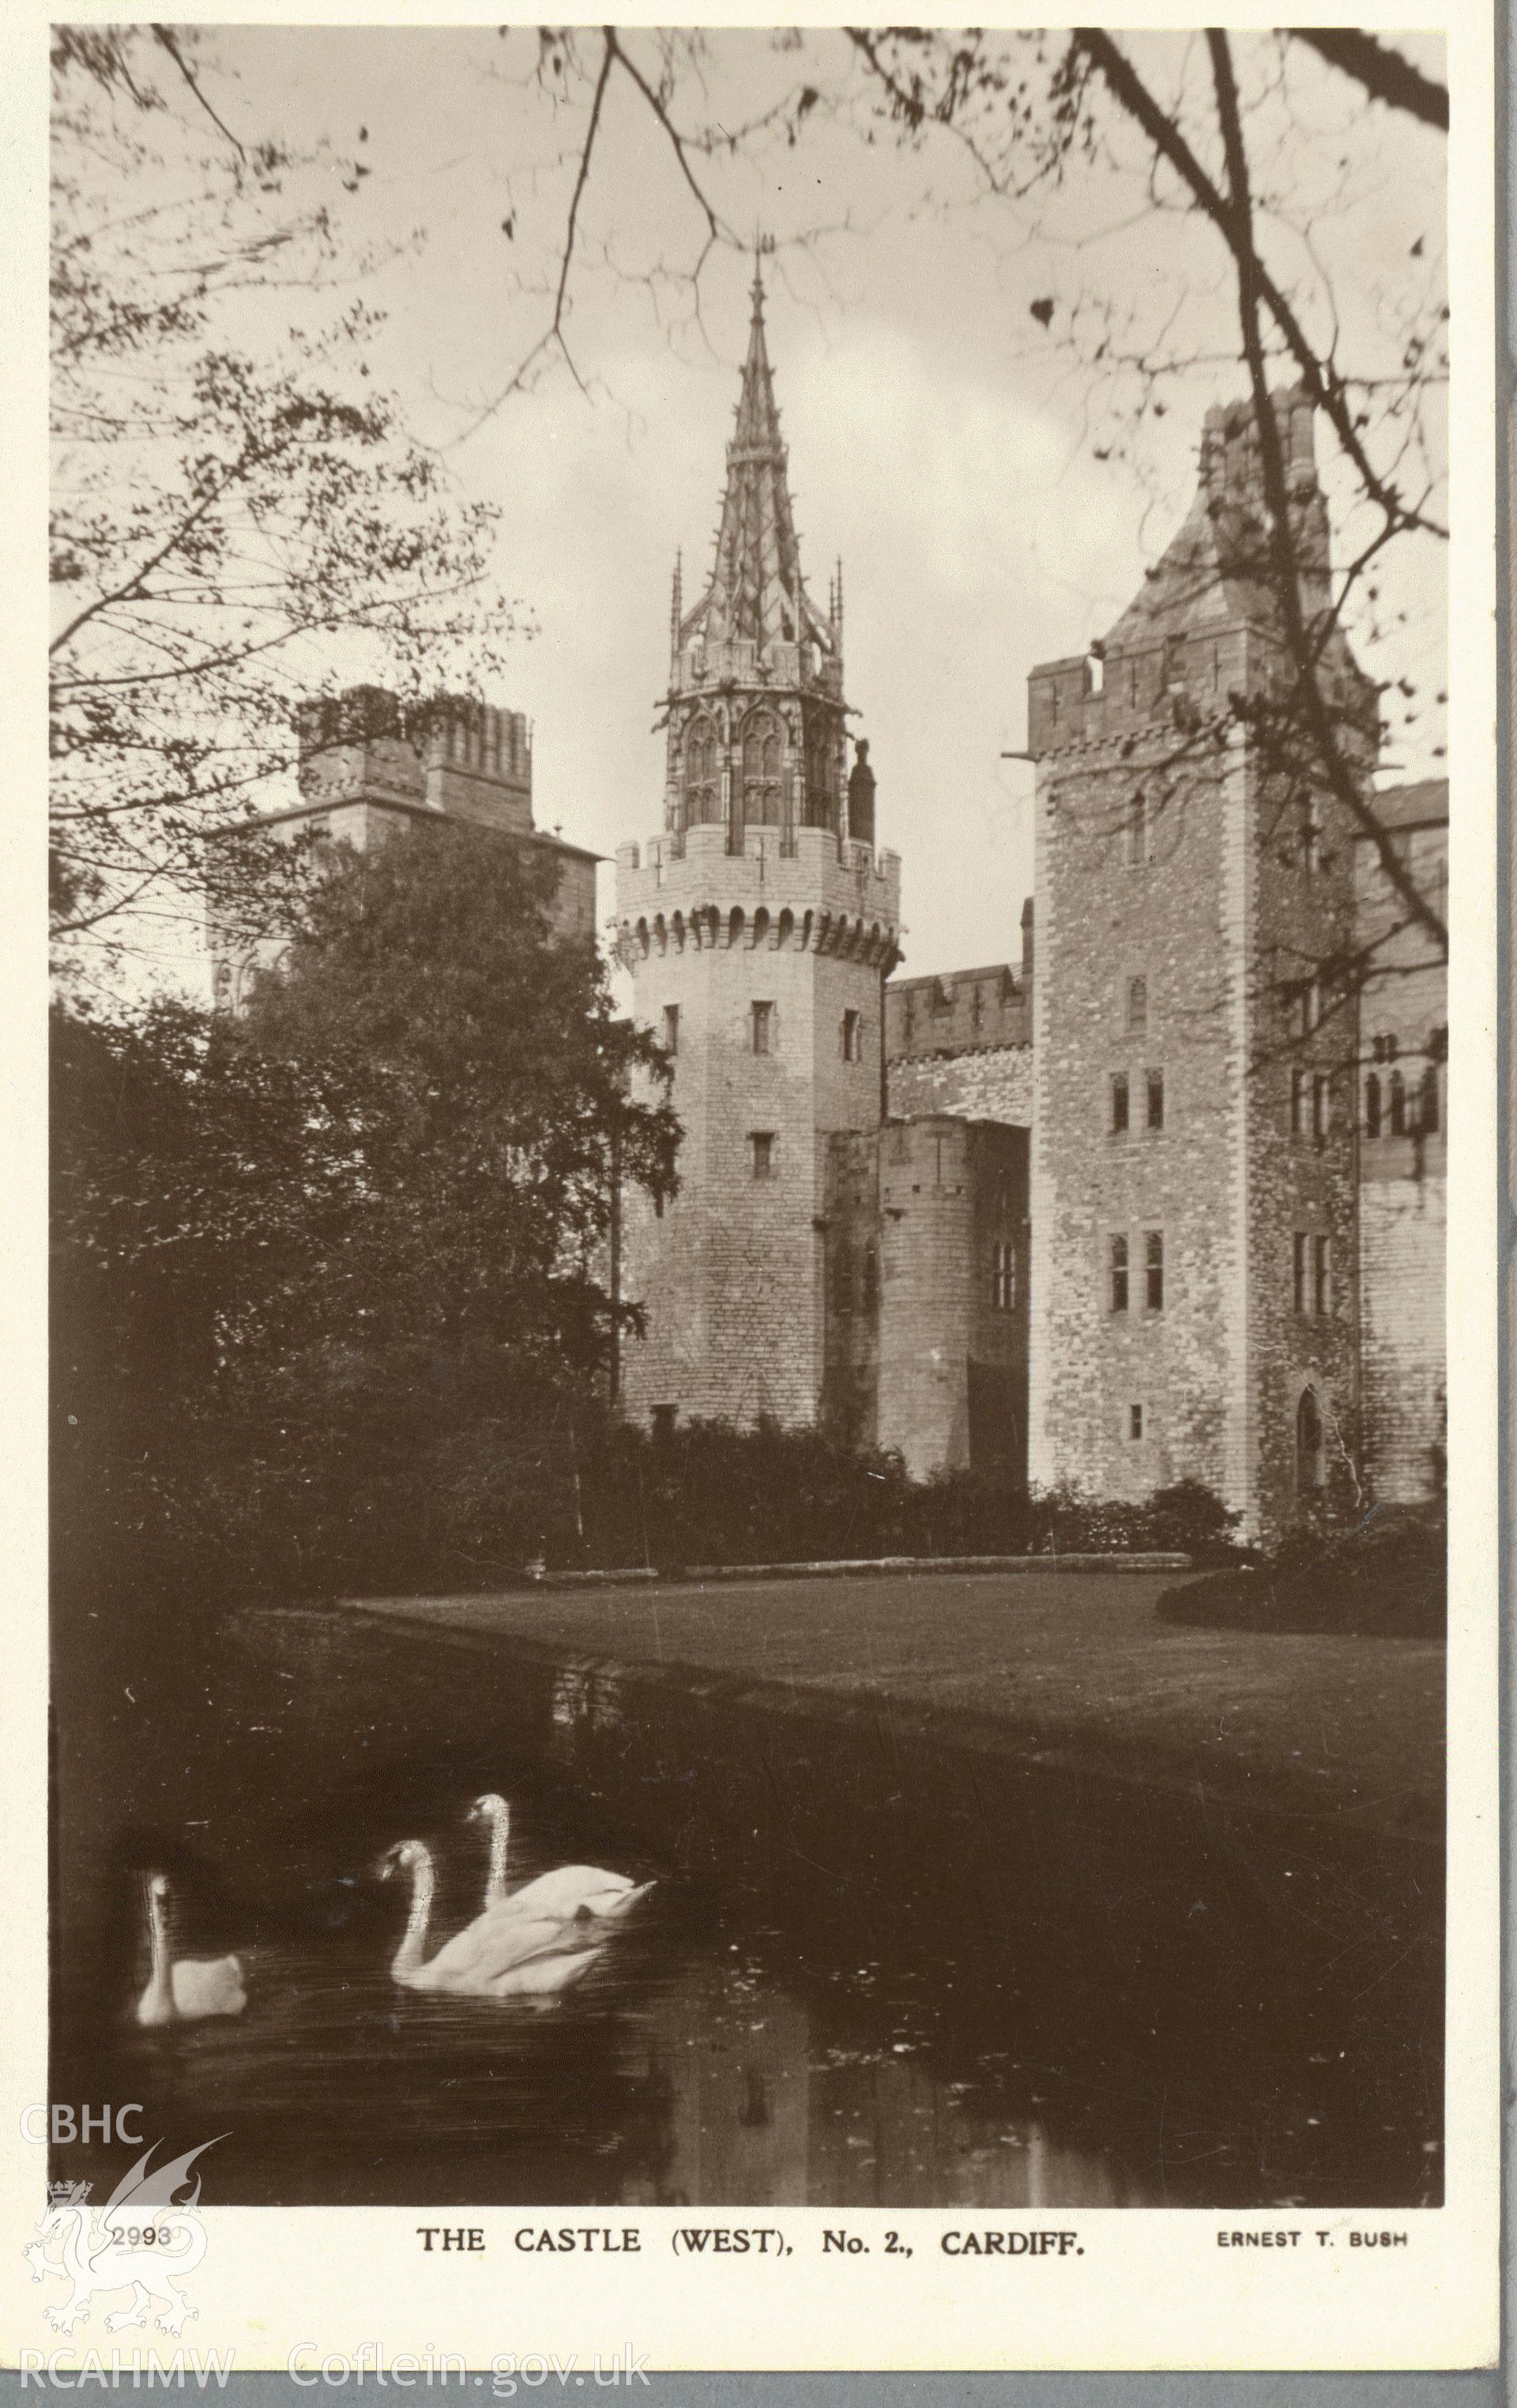 Digitised postcard image of Cardiff Castle from the west, The Royal Photographic Company, London. Produced by Parks and Gardens Data Services, from an original item in the Peter Davis Collection at Parks and Gardens UK. We hold only web-resolution images of this collection, suitable for viewing on screen and for research purposes only. We do not hold the original images, or publication quality scans.